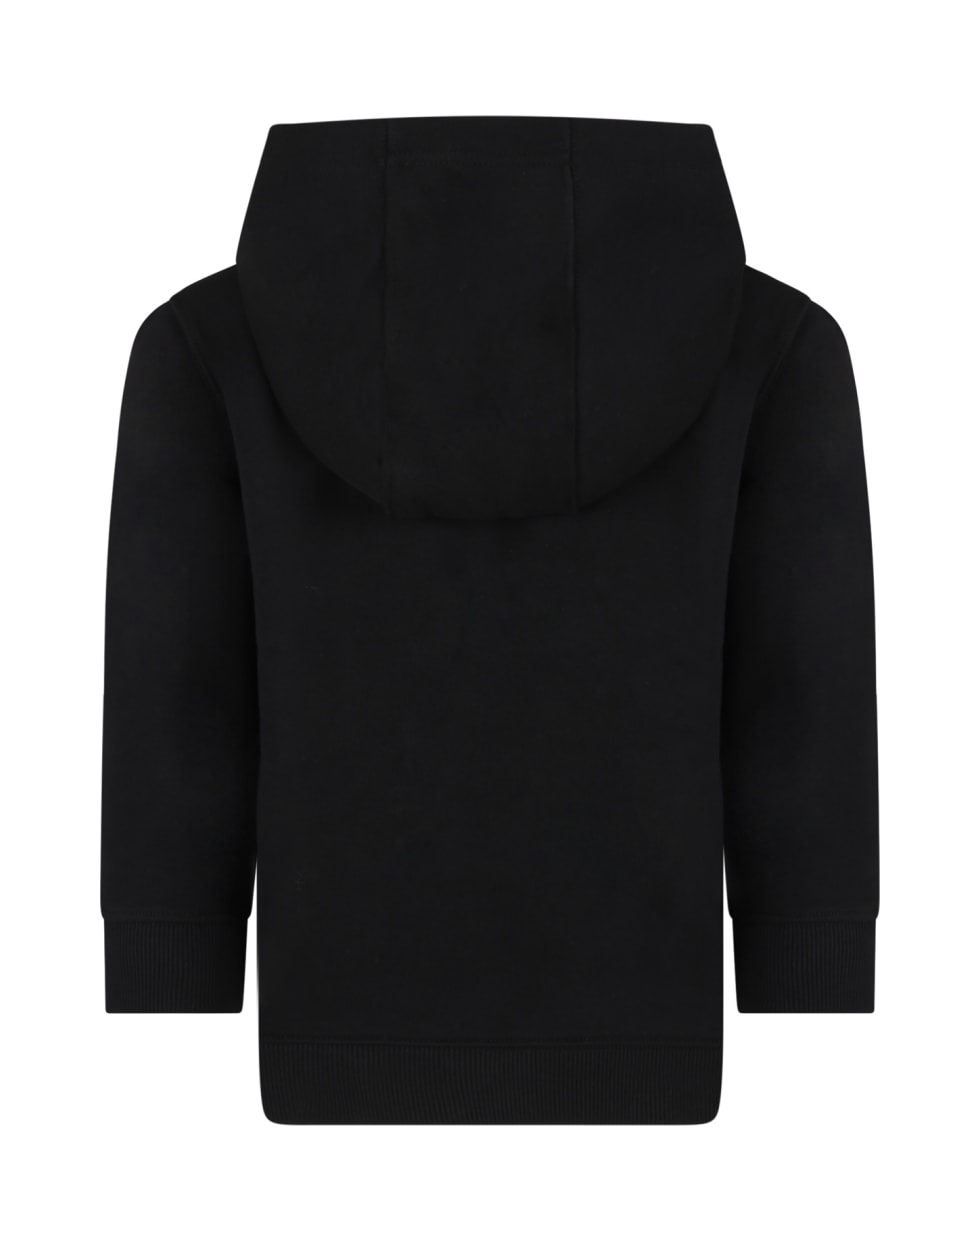 Givenchy Black Sweatshirt For Boy With Prints - Nero